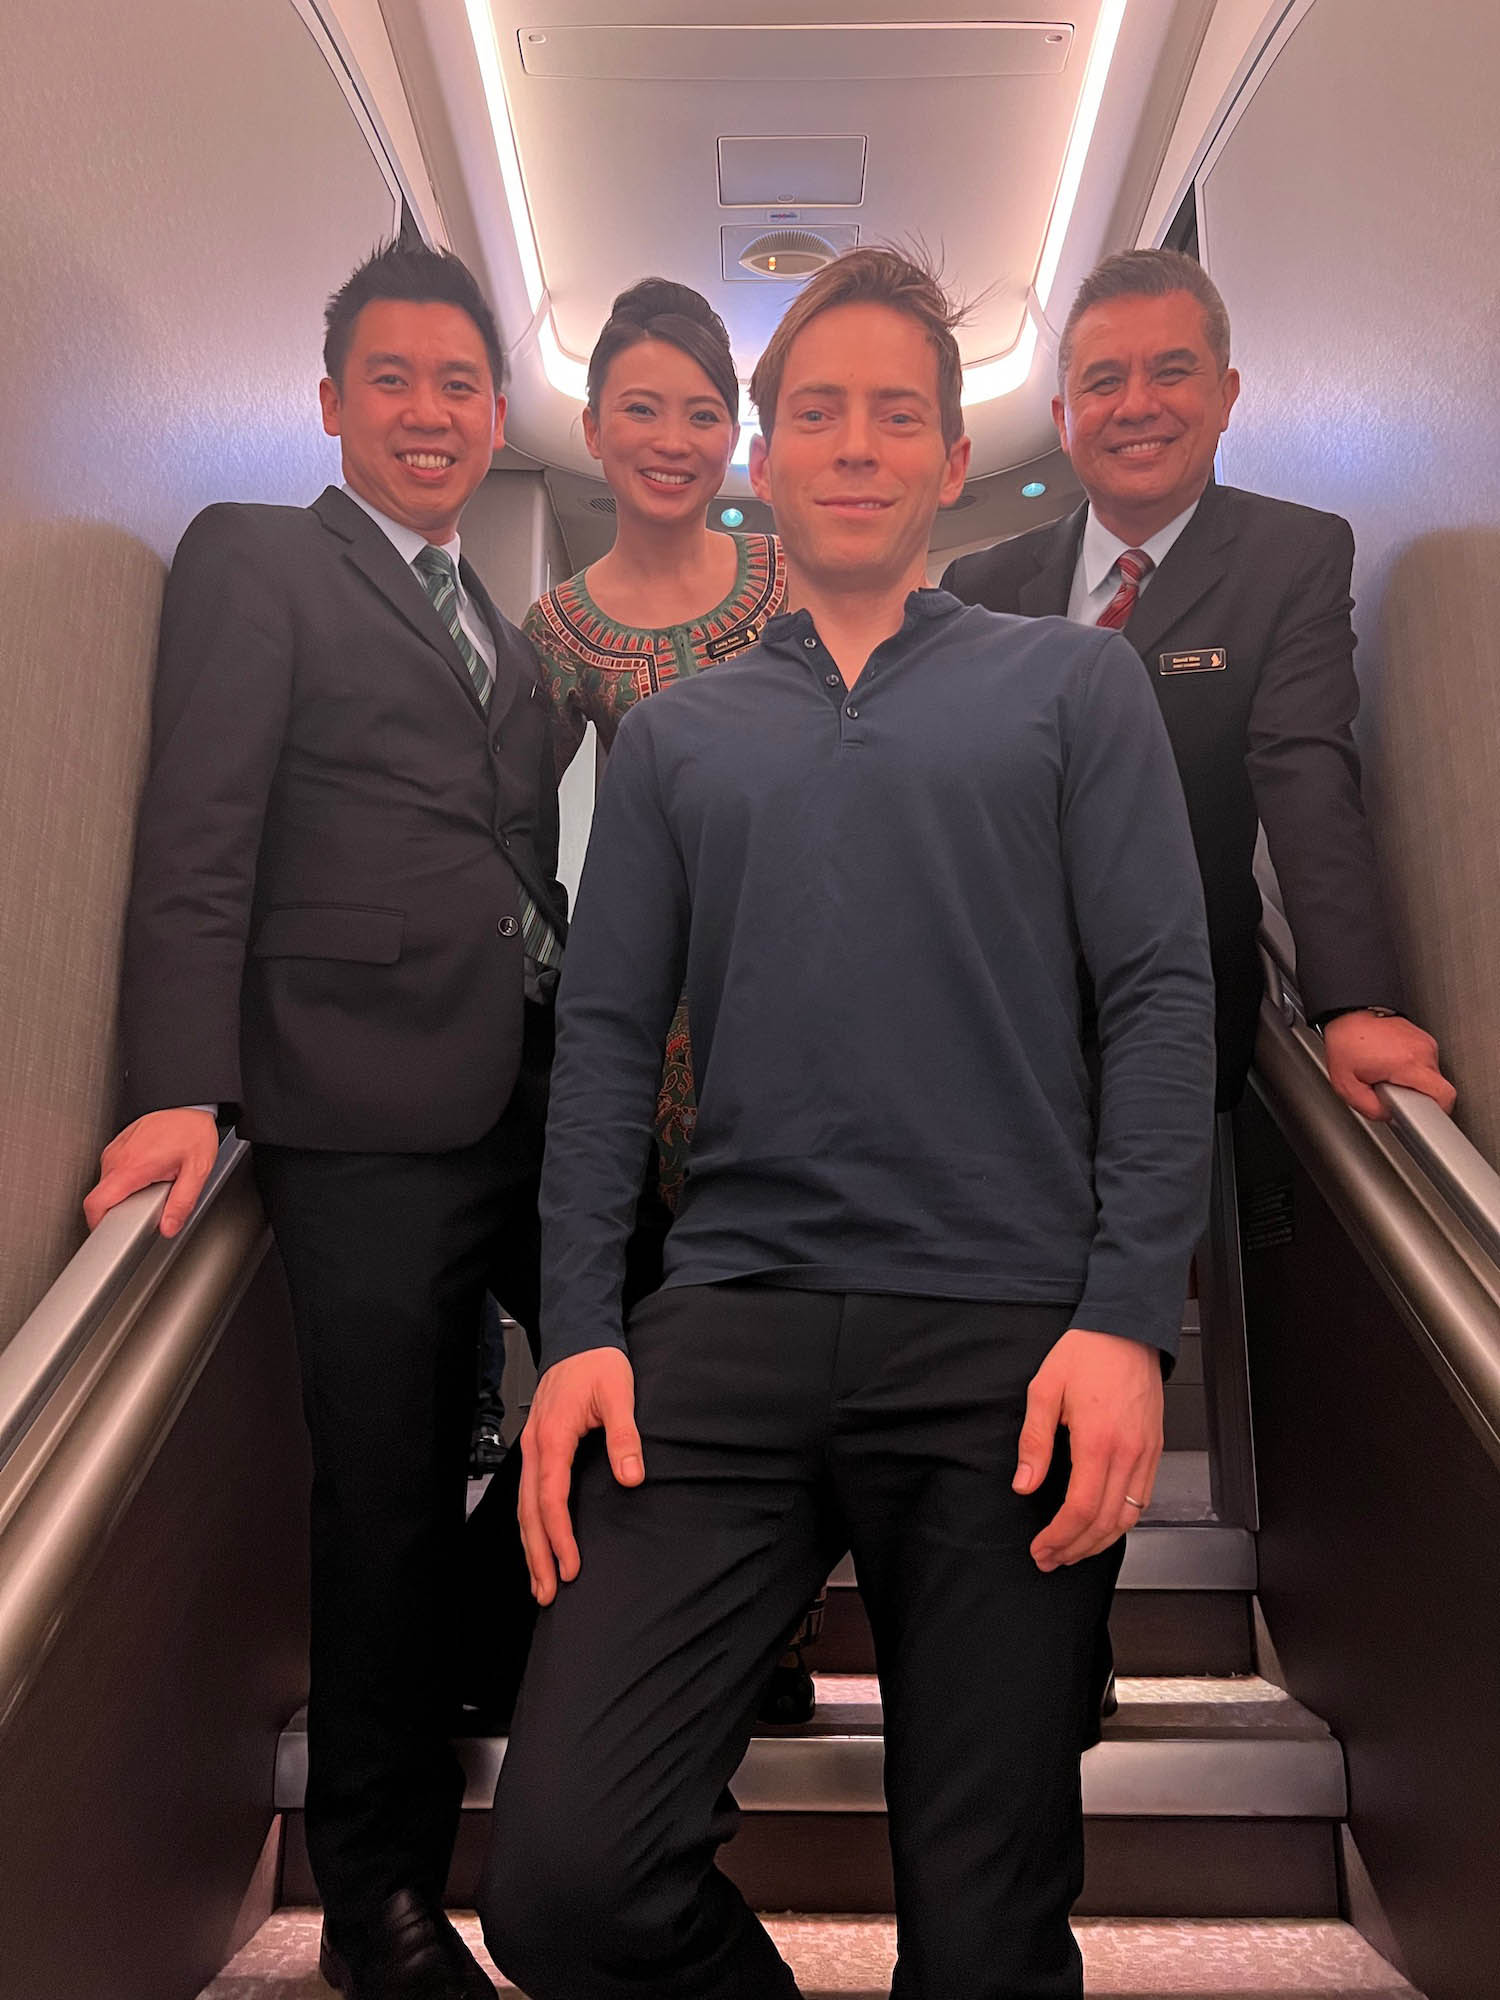 a group of people standing on an airplane stairs